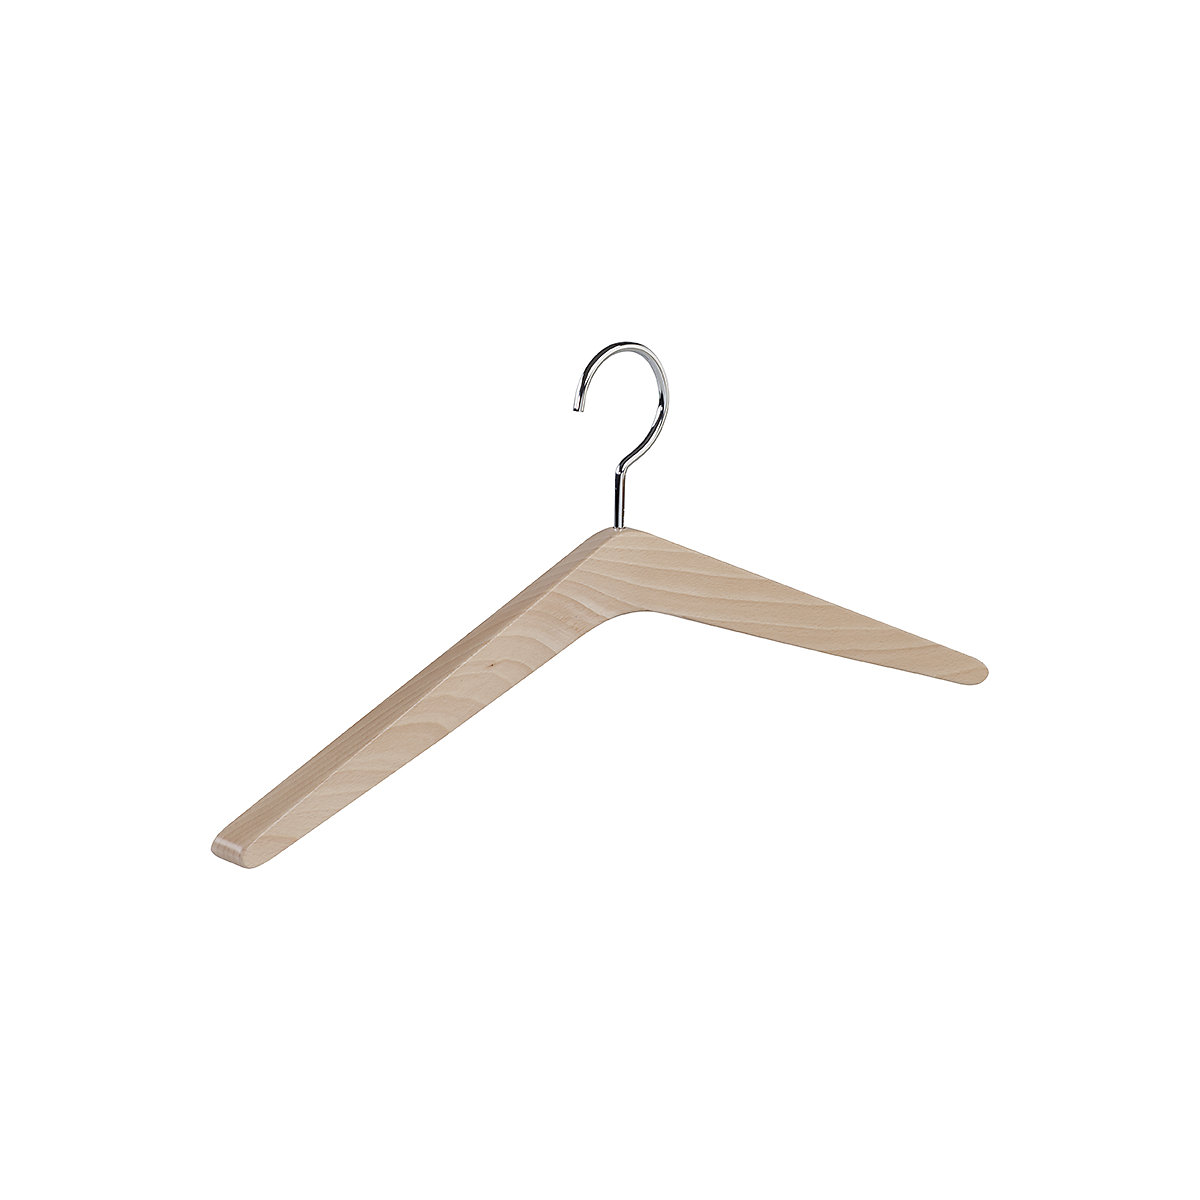 WOOD wooden coat hanger, WxH 450 x 110 mm, pack of 4, clear varnished beech-9